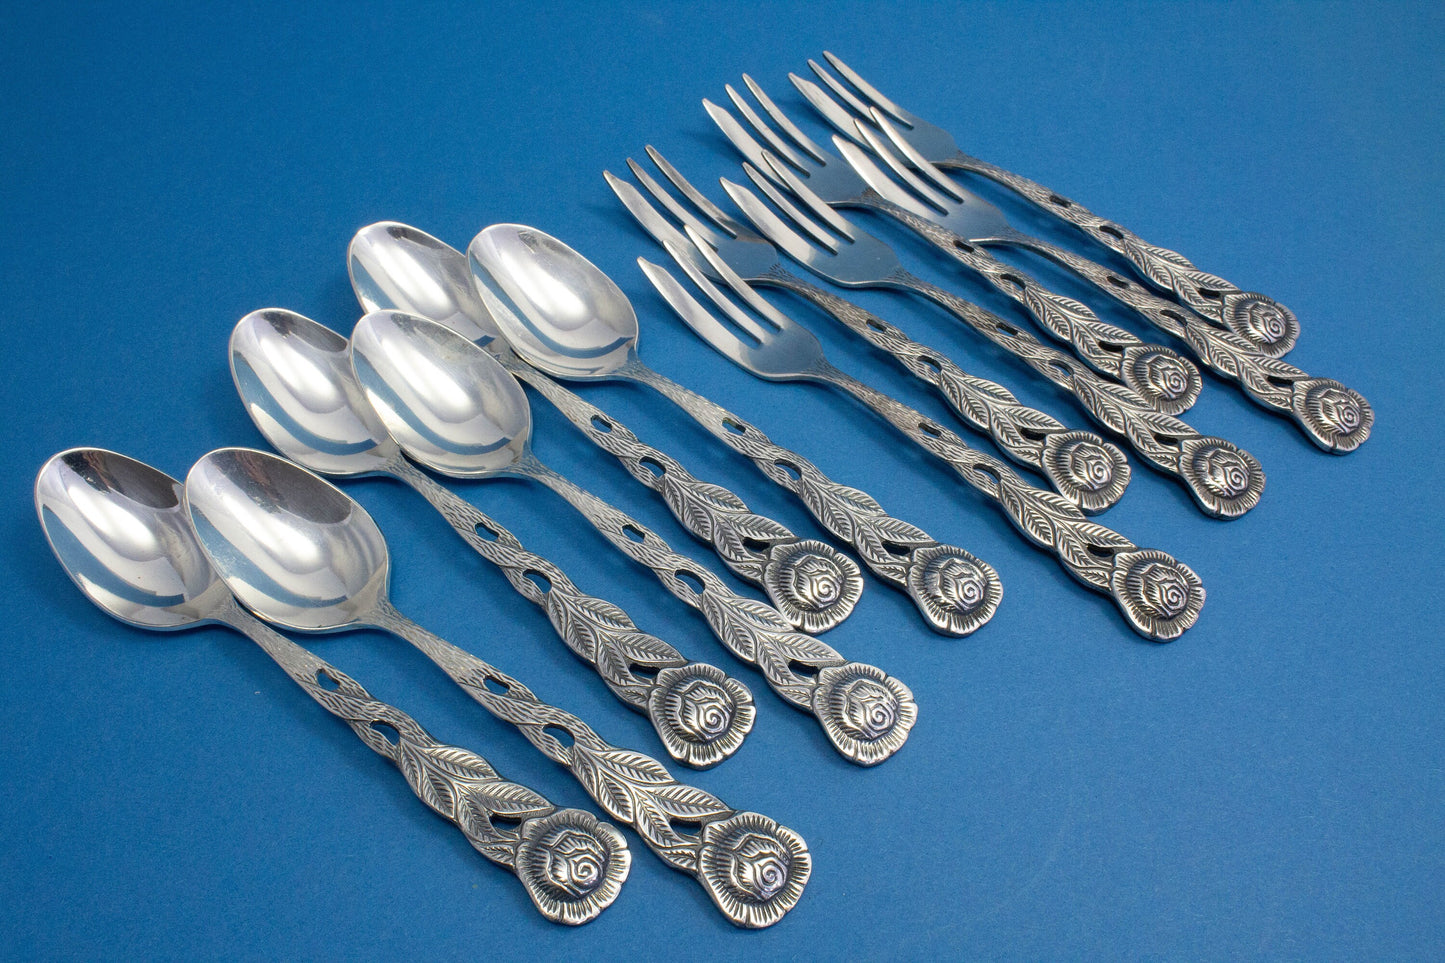 Cutlery set for 6 people, teaspoon and cake fork with roses